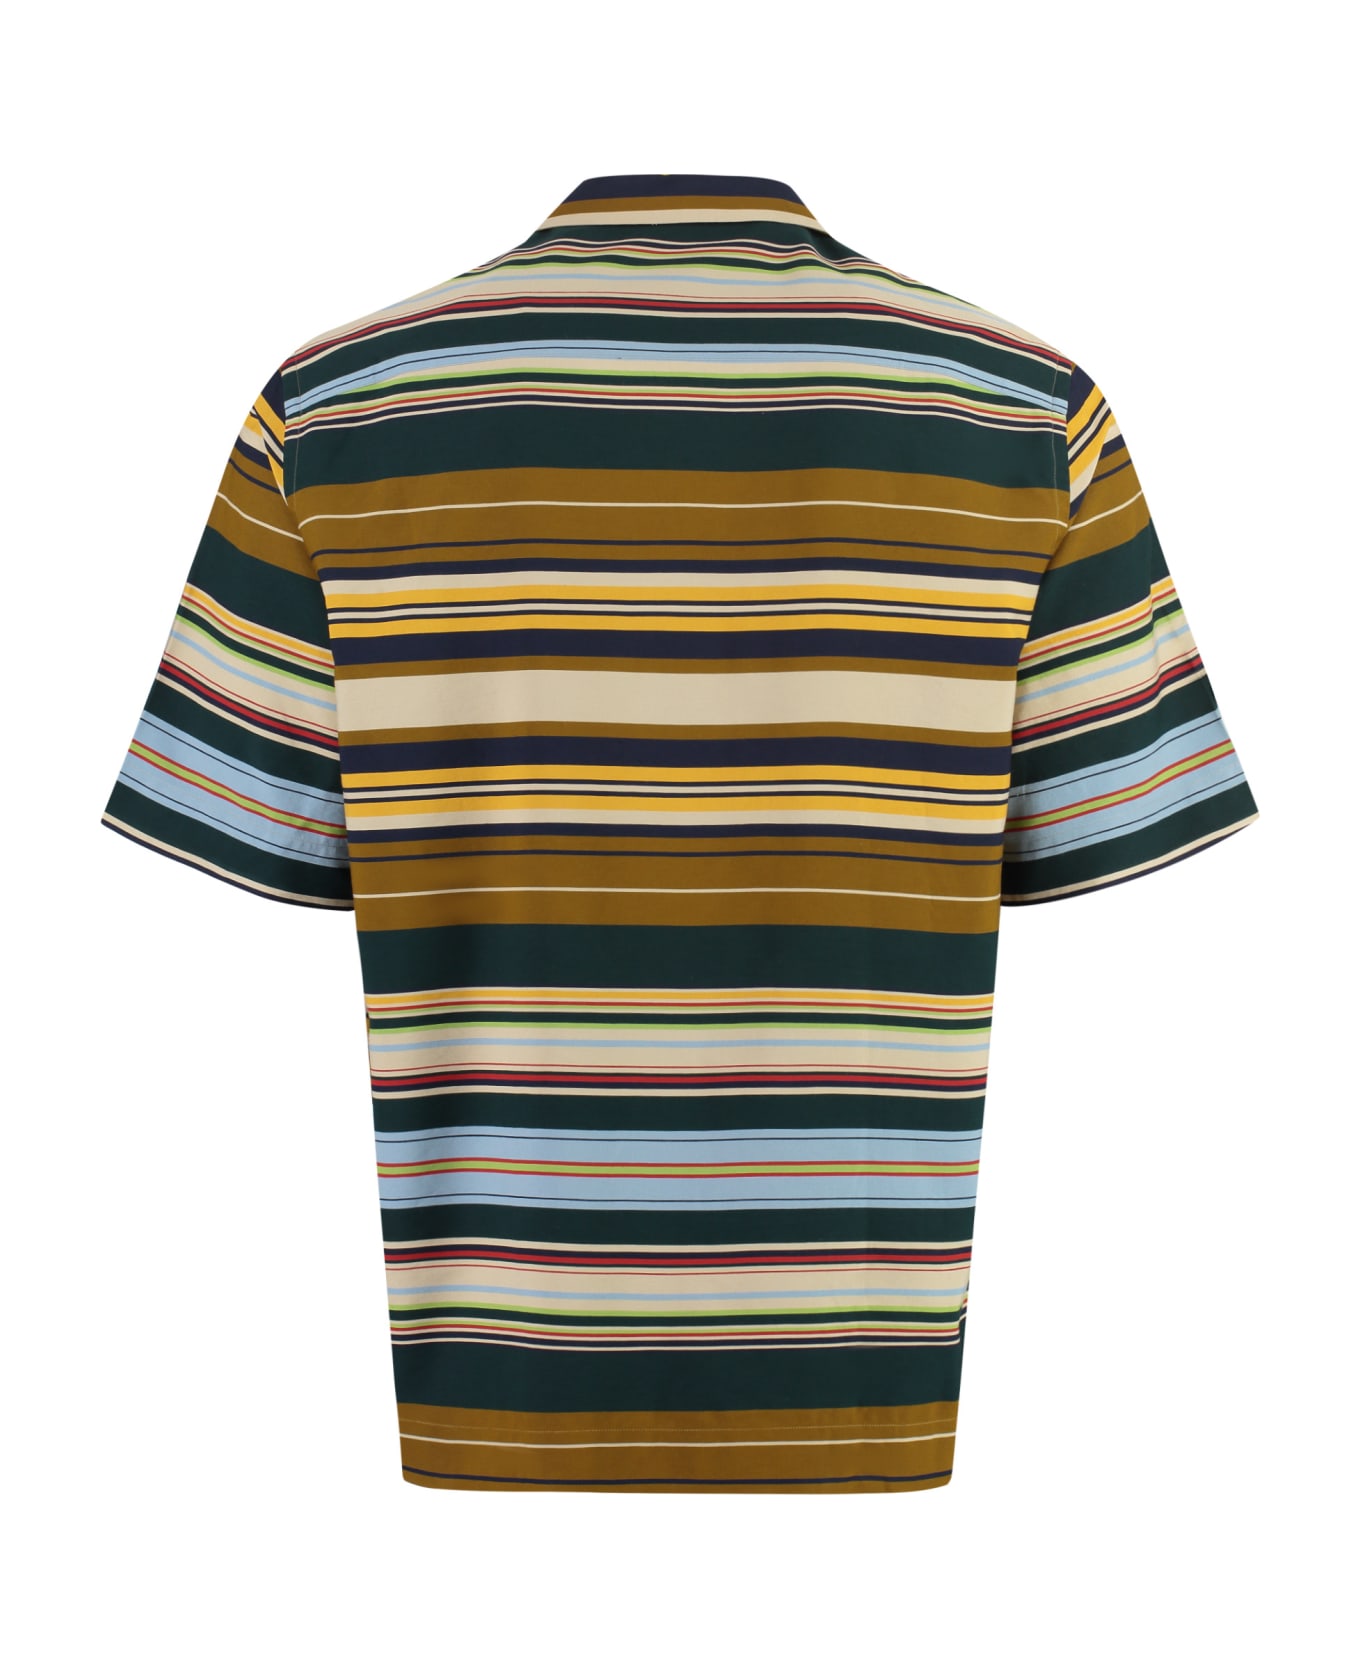 Paul Smith Printed Short Sleeved Shirt - Multicolor